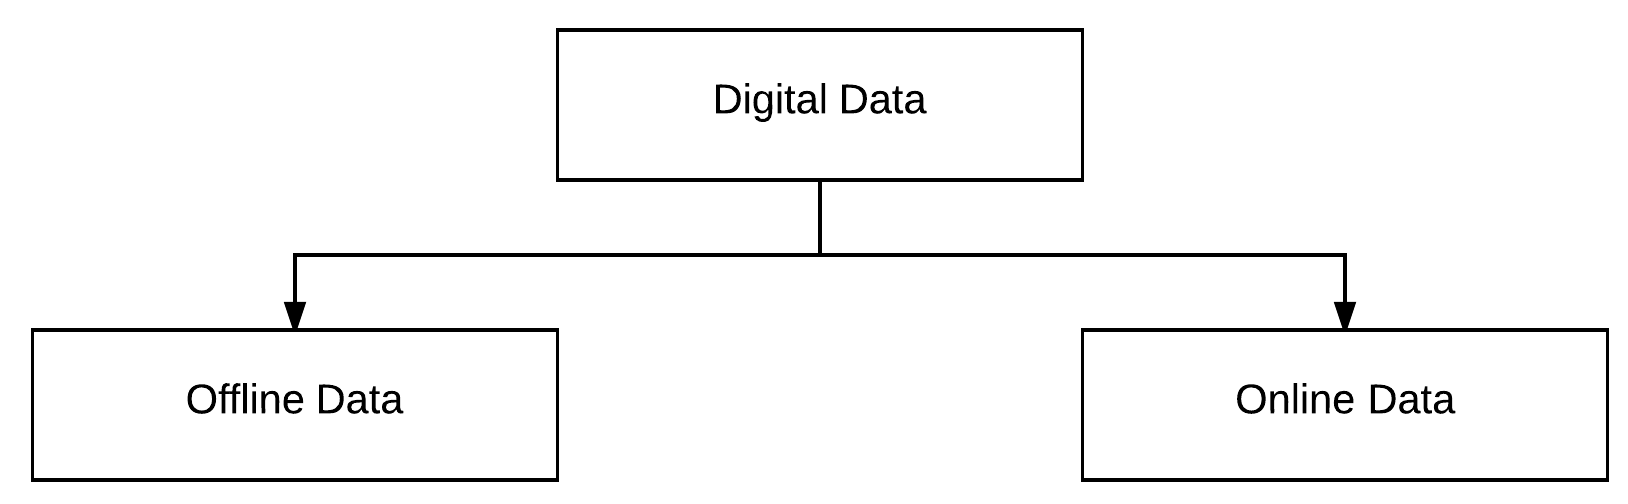 Digital Data can be classified into two types - Offline and Online Data